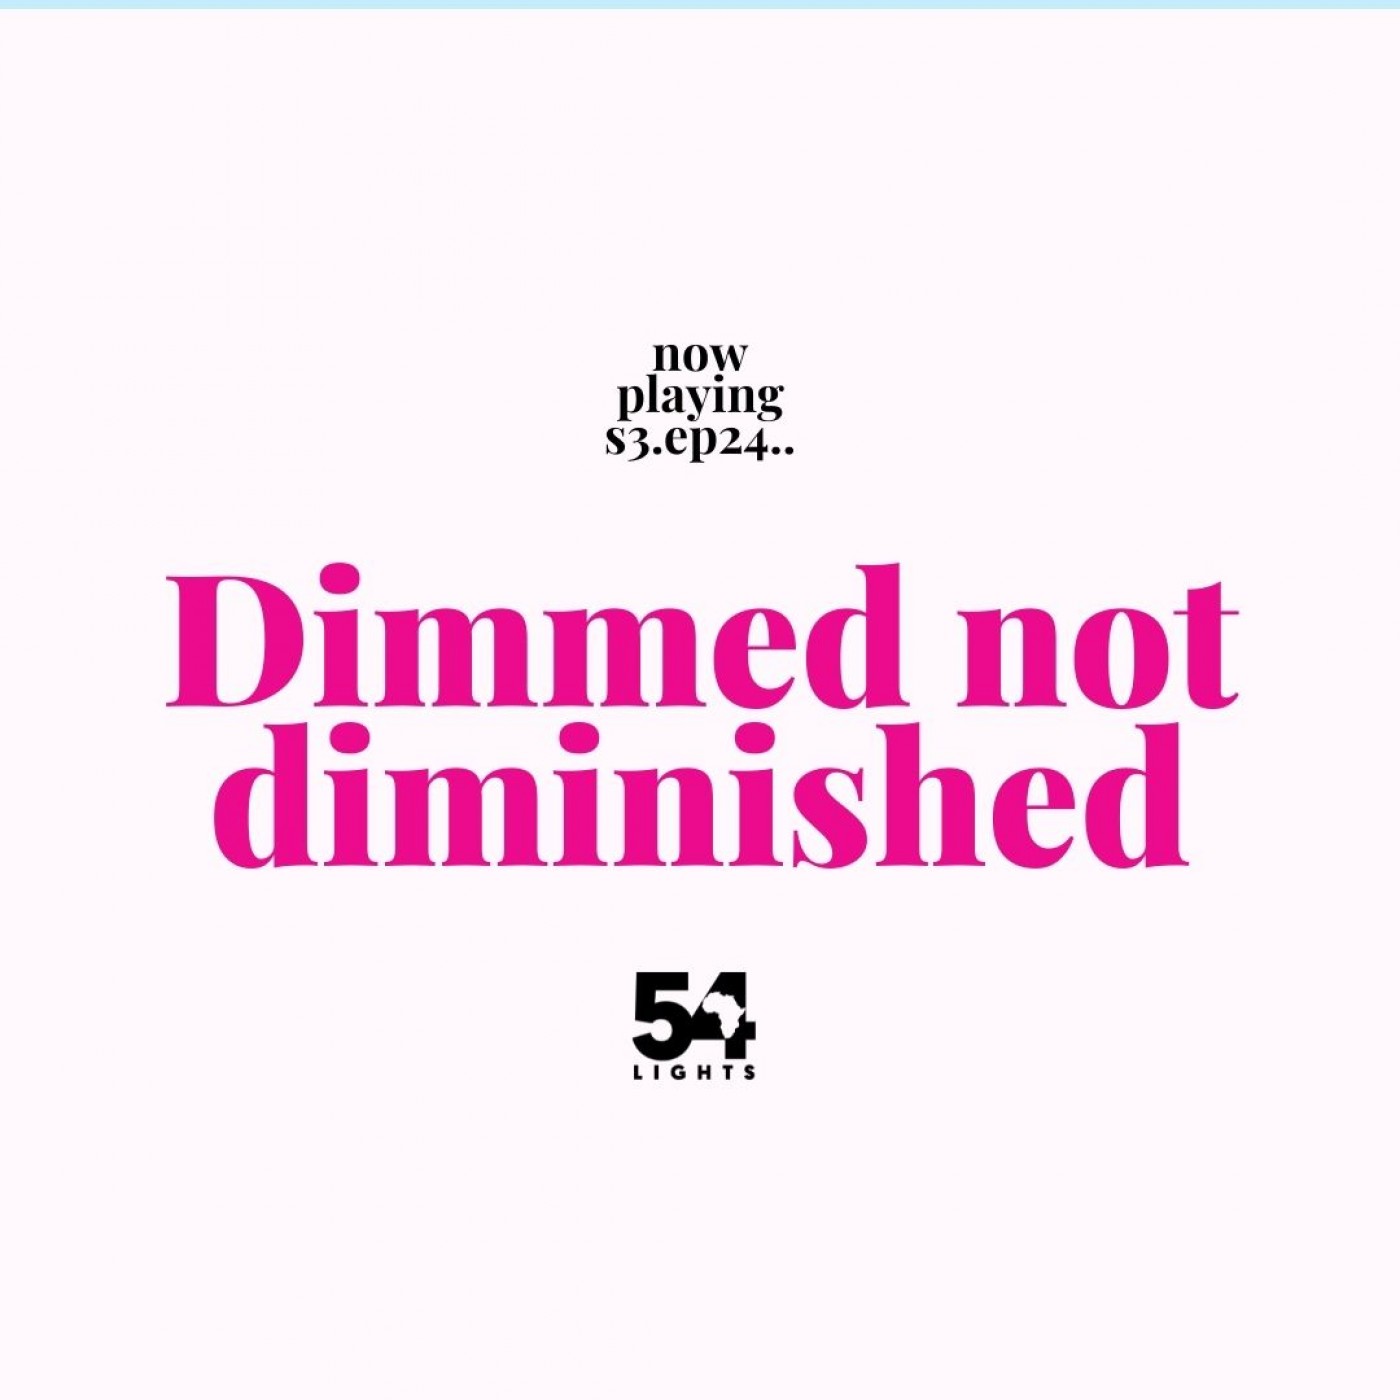 Dimmed (but) not diminished